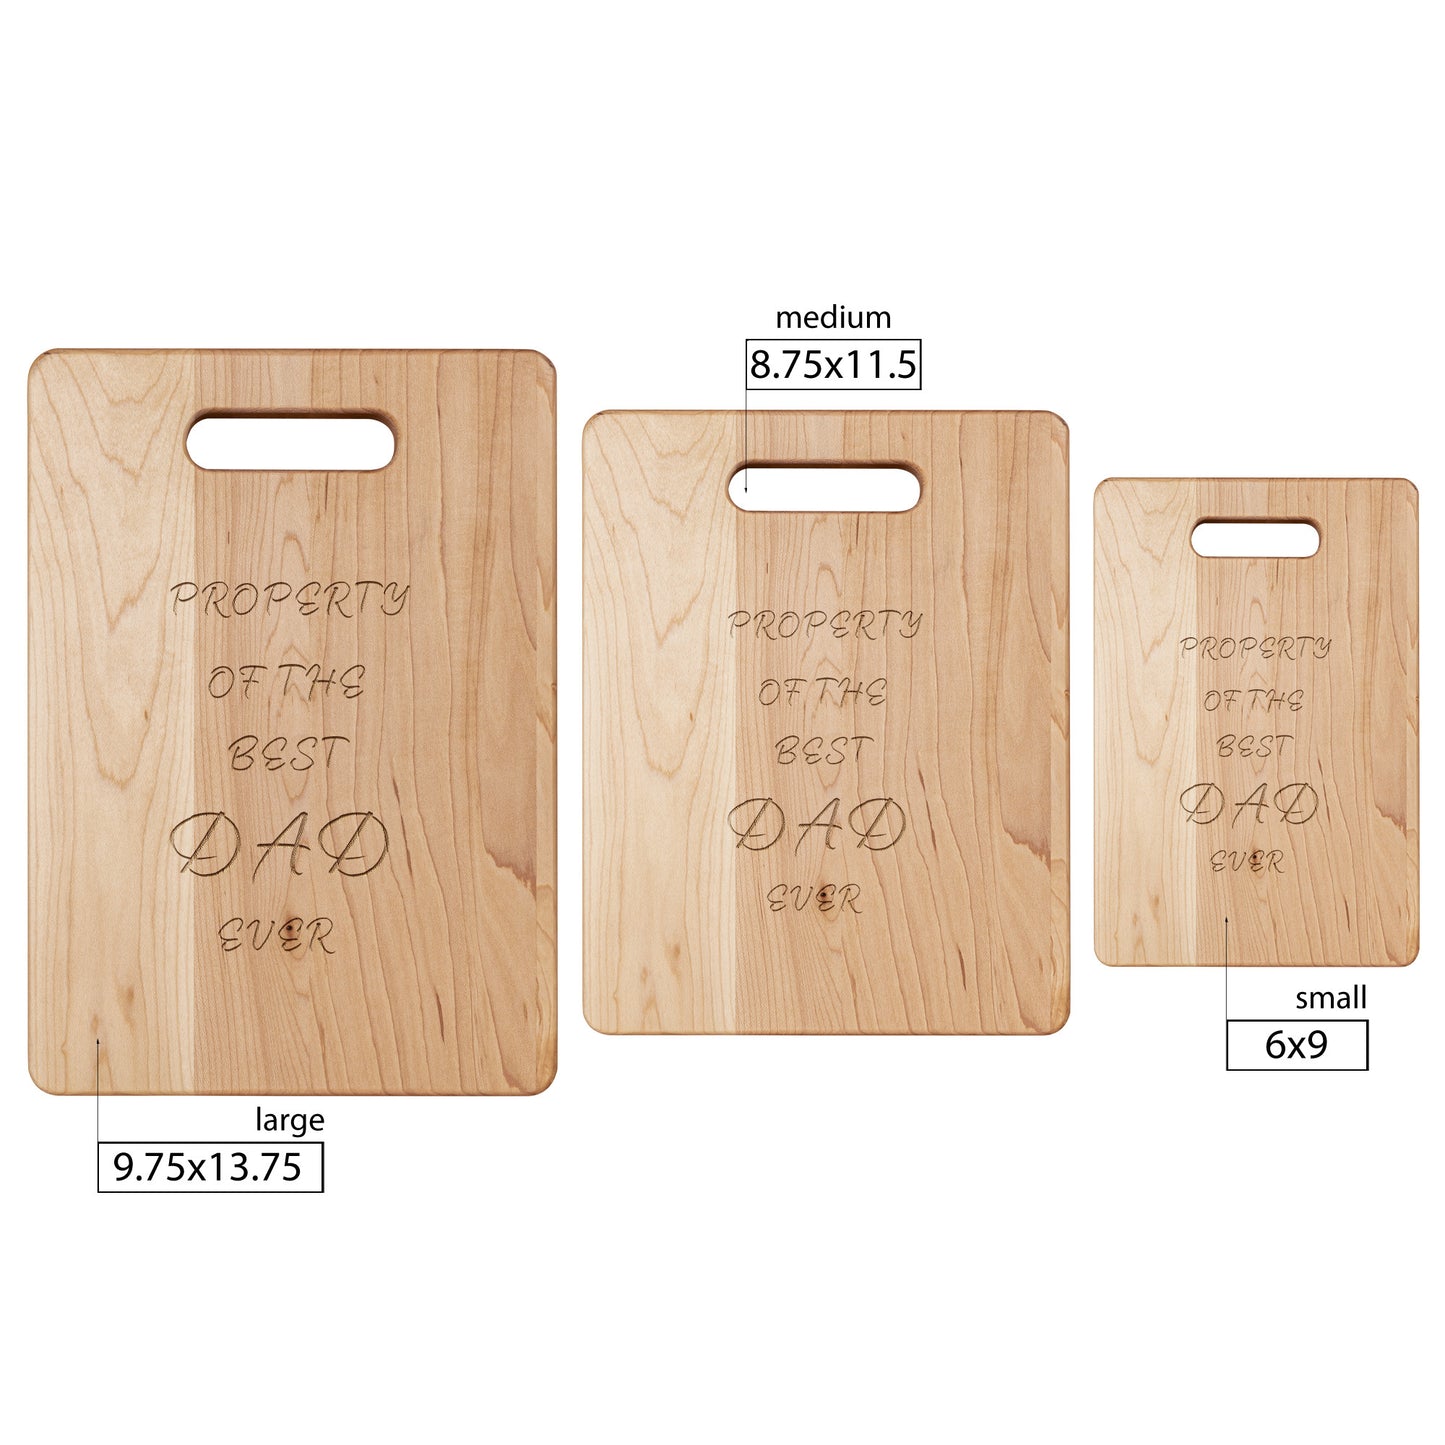 Celebrate Fathers Day With A Cutting Board For The "Best Dad Ever"